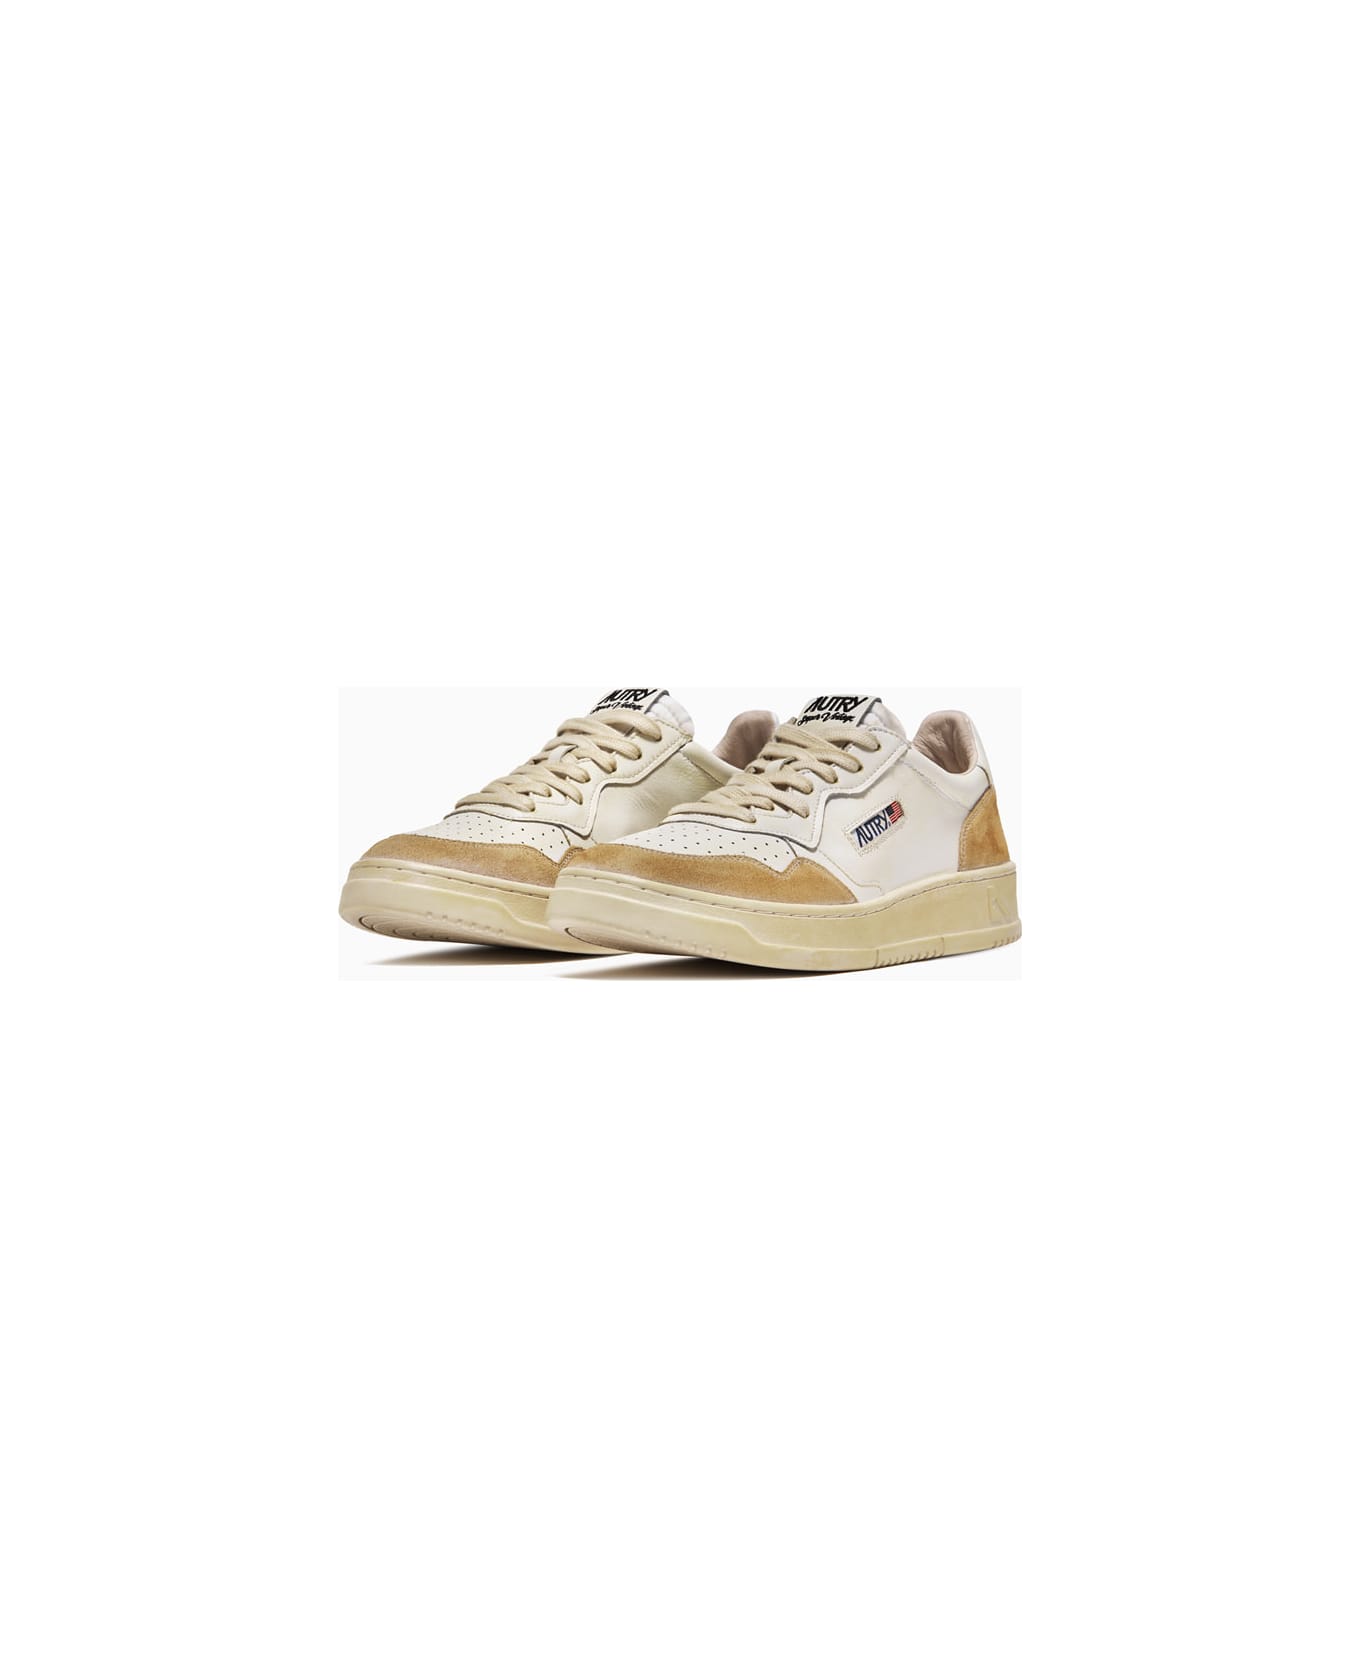 Autry Sneakers Super Vintage Avlm-yl01 - WHITE